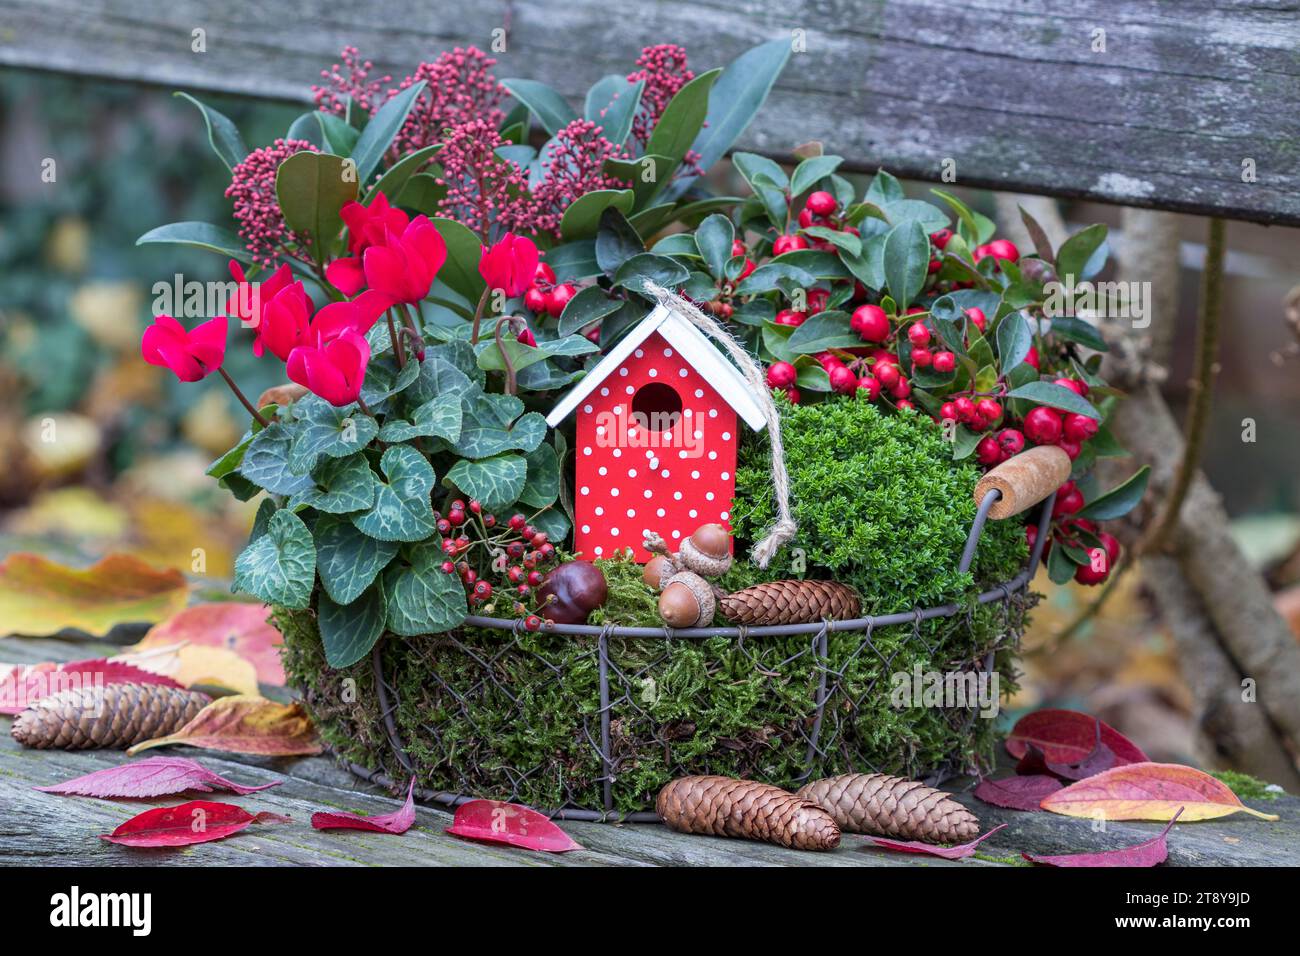 basket with red cyclamen, shrub veronica, gaultheria, skimmia japonica and decvorative birdhouse in autumn garden Stock Photo